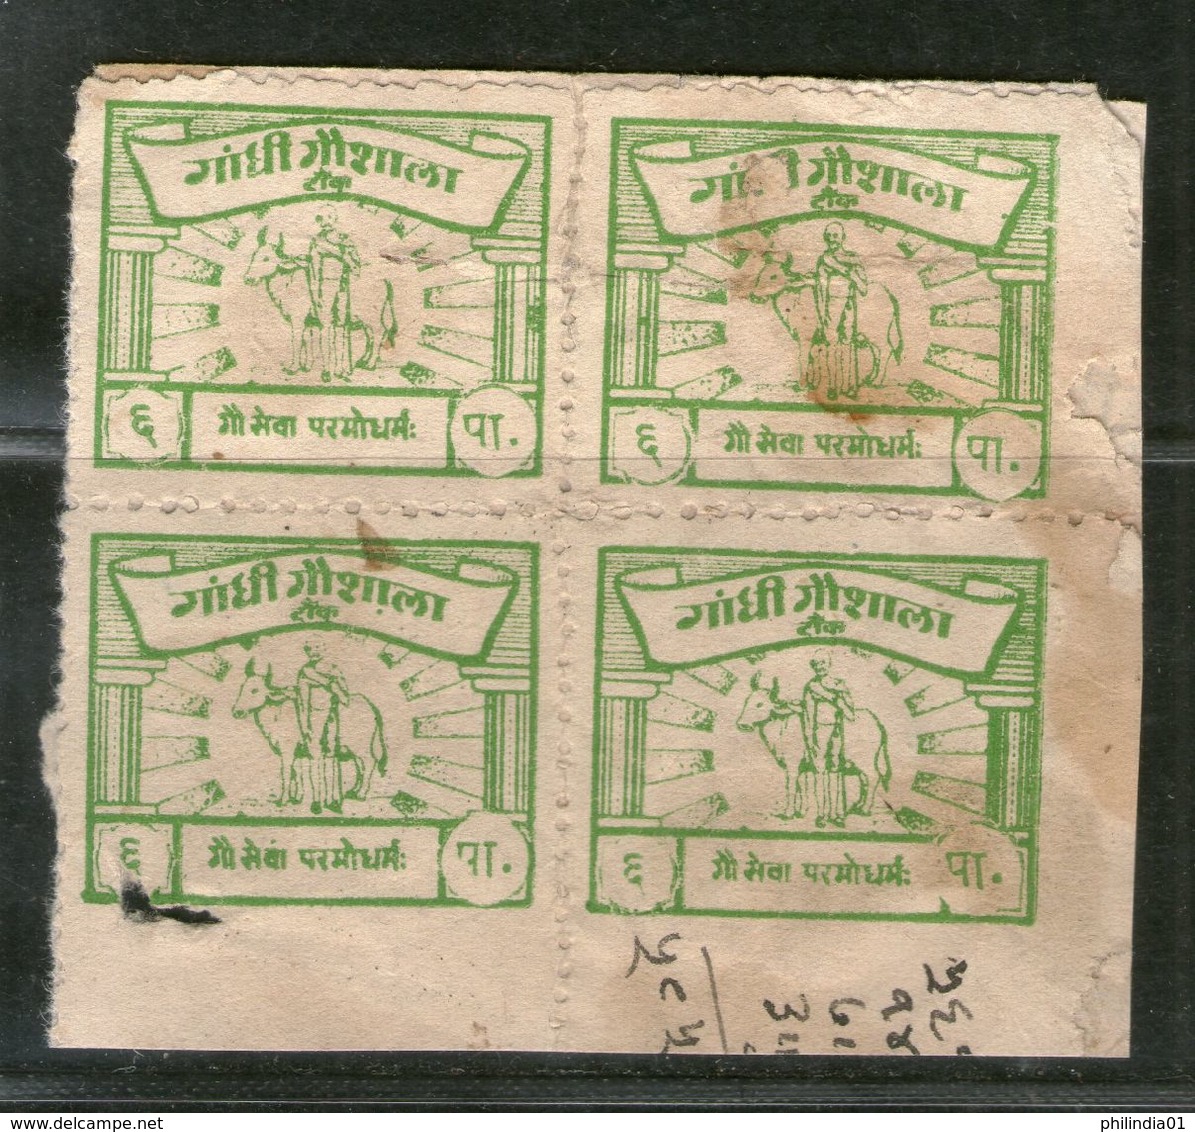 India 6ps Gandhi Gaushala Tonk Charity Label BLK/4 Extremely RARE # 3710 - Charity Stamps